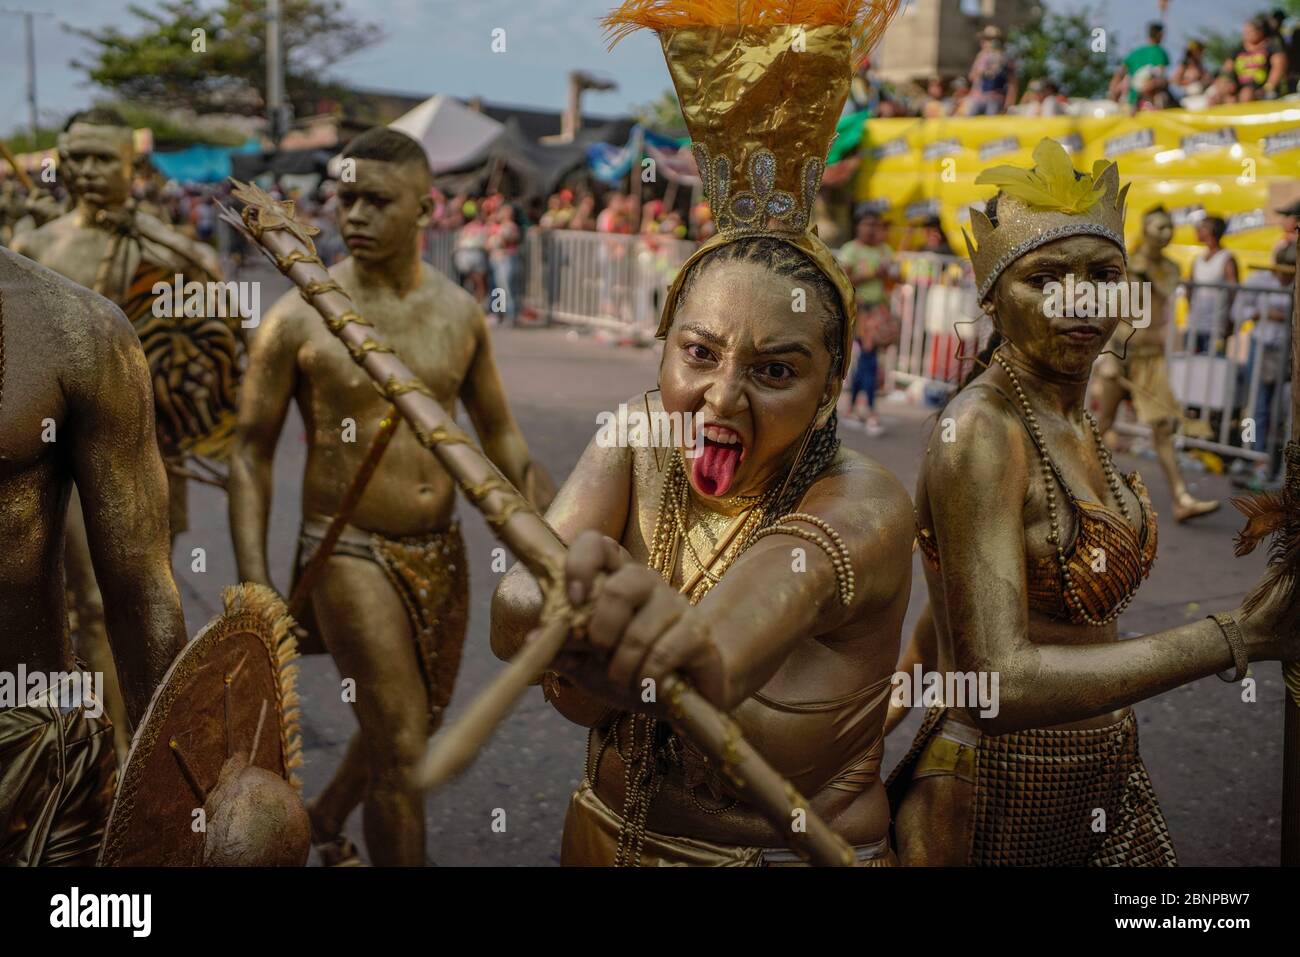 Barranquilla boasts the second-largest Carnival celebration in the world. A combinations of pagan ceremonies, catholic beliefs and ethnic diversity, t Stock Photo